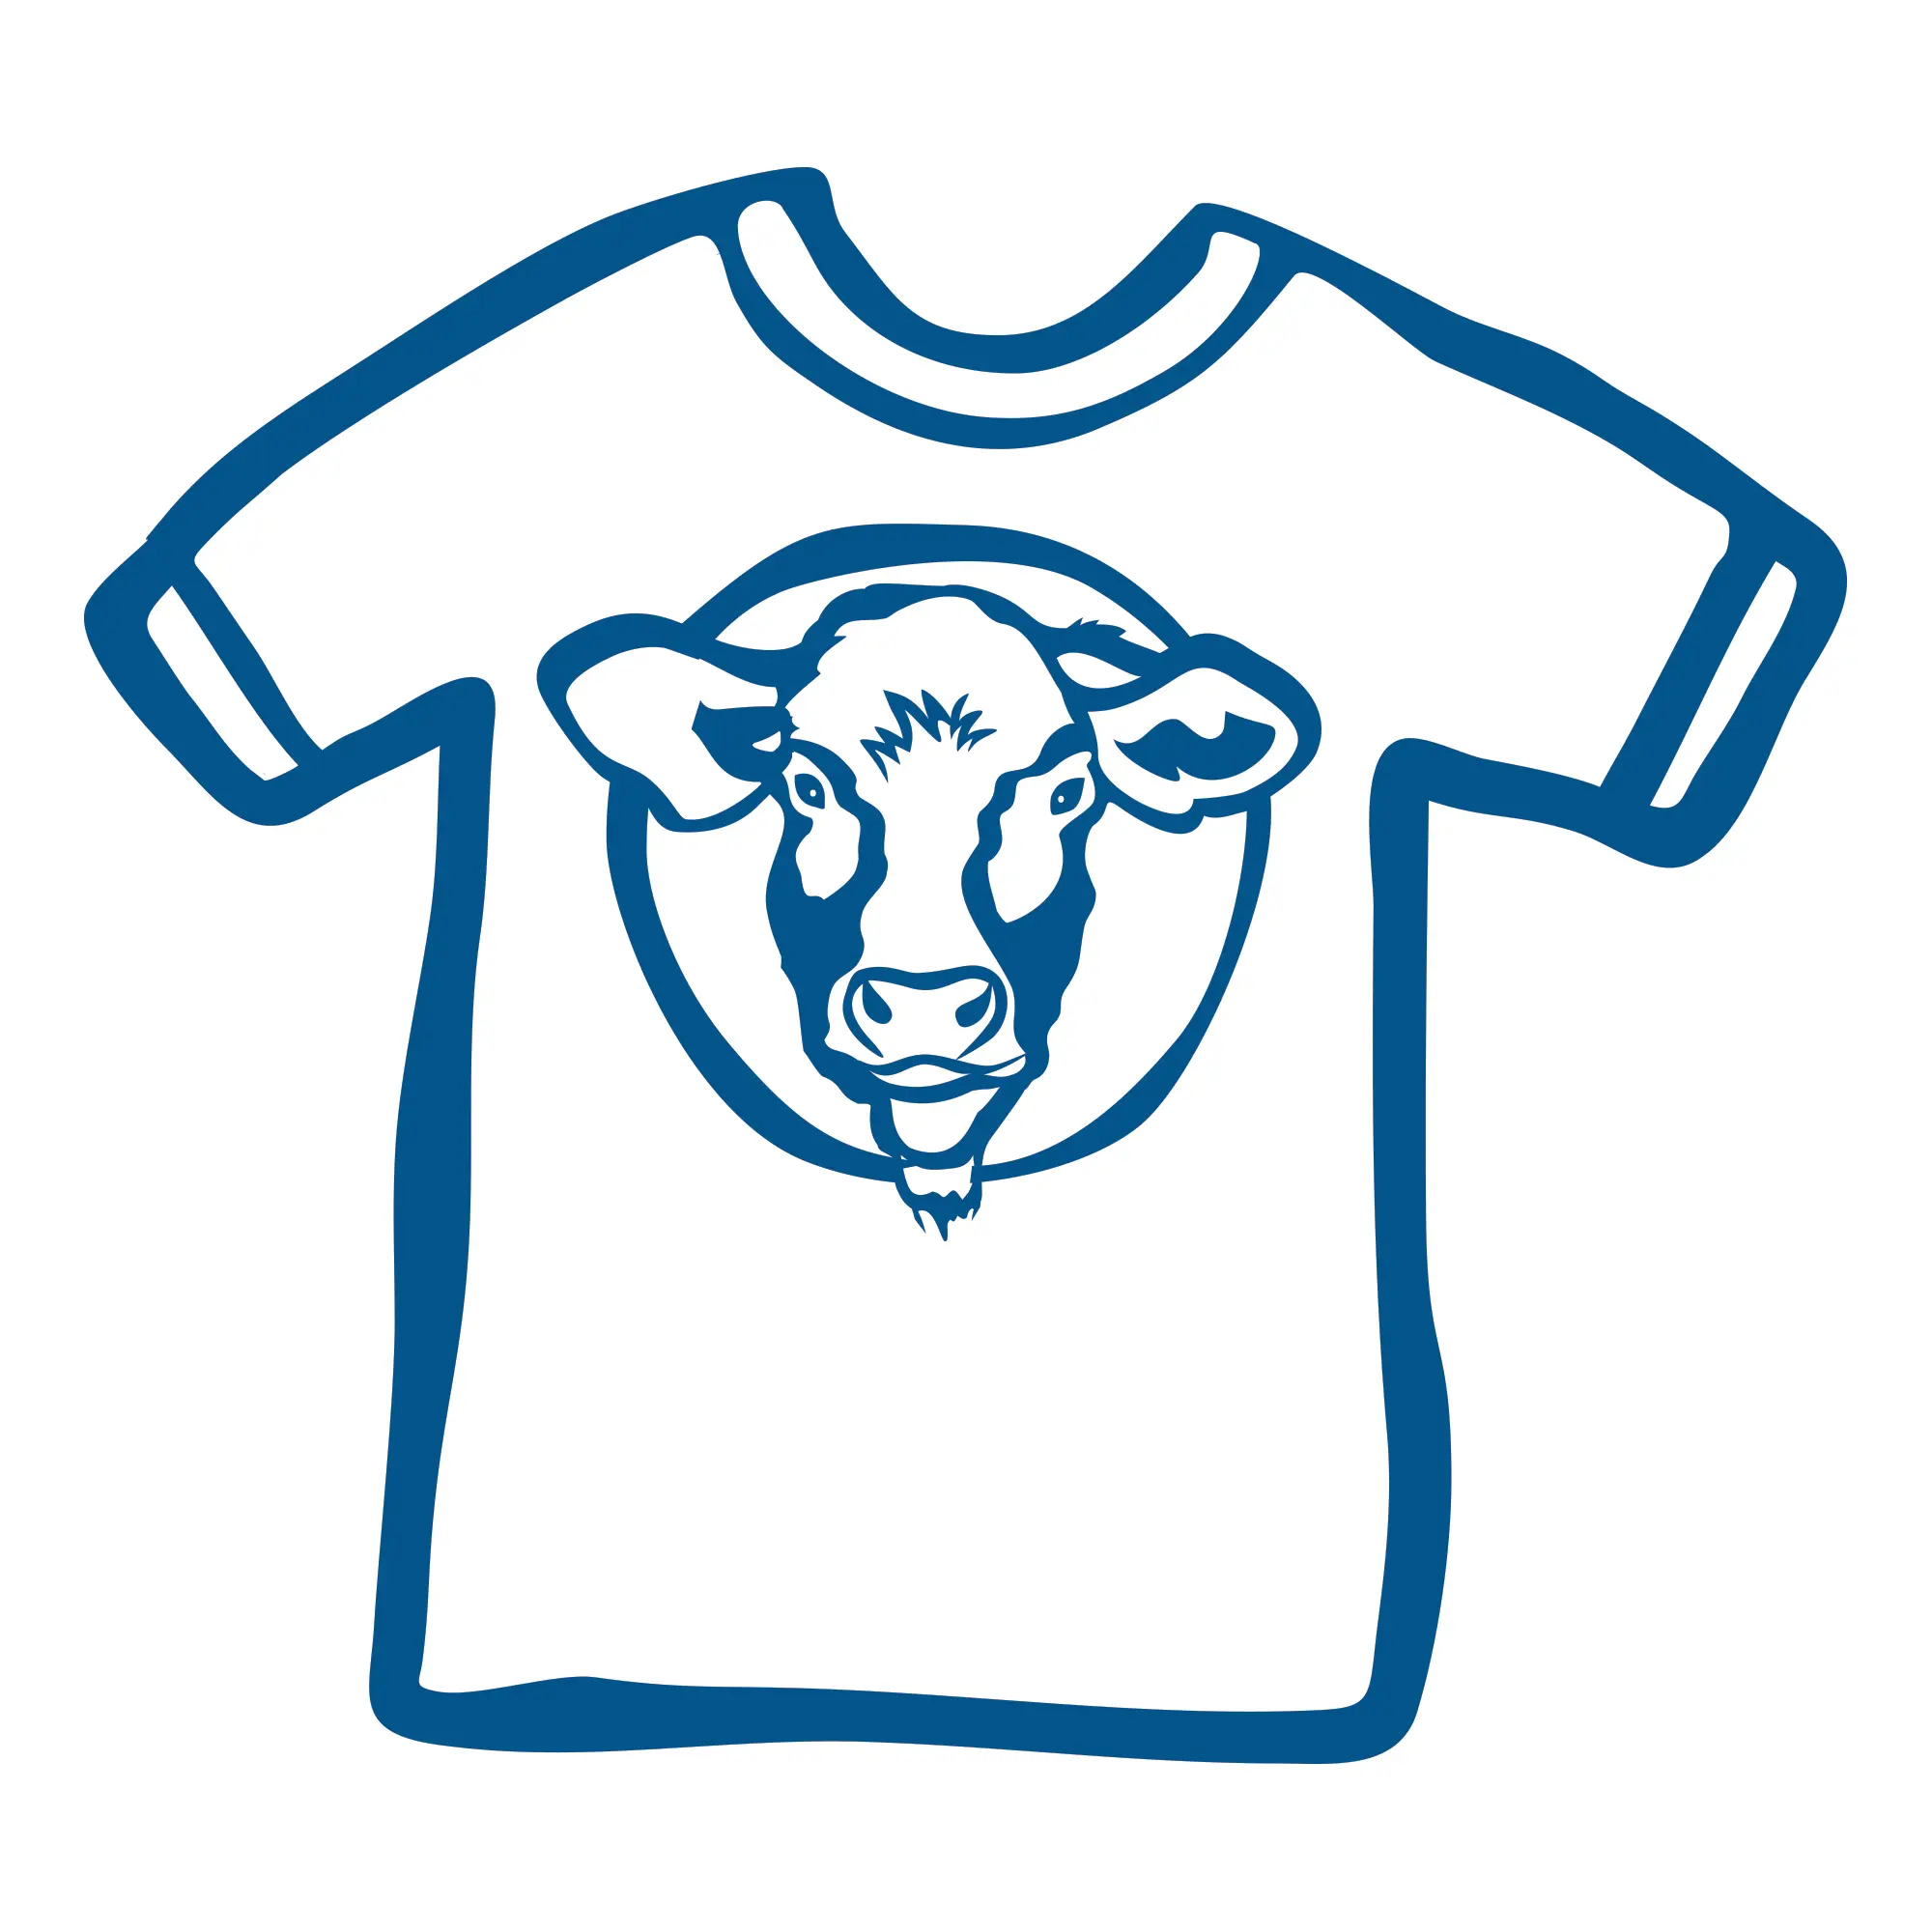 Artistic drawing of a shirt with cow head in blue outline.